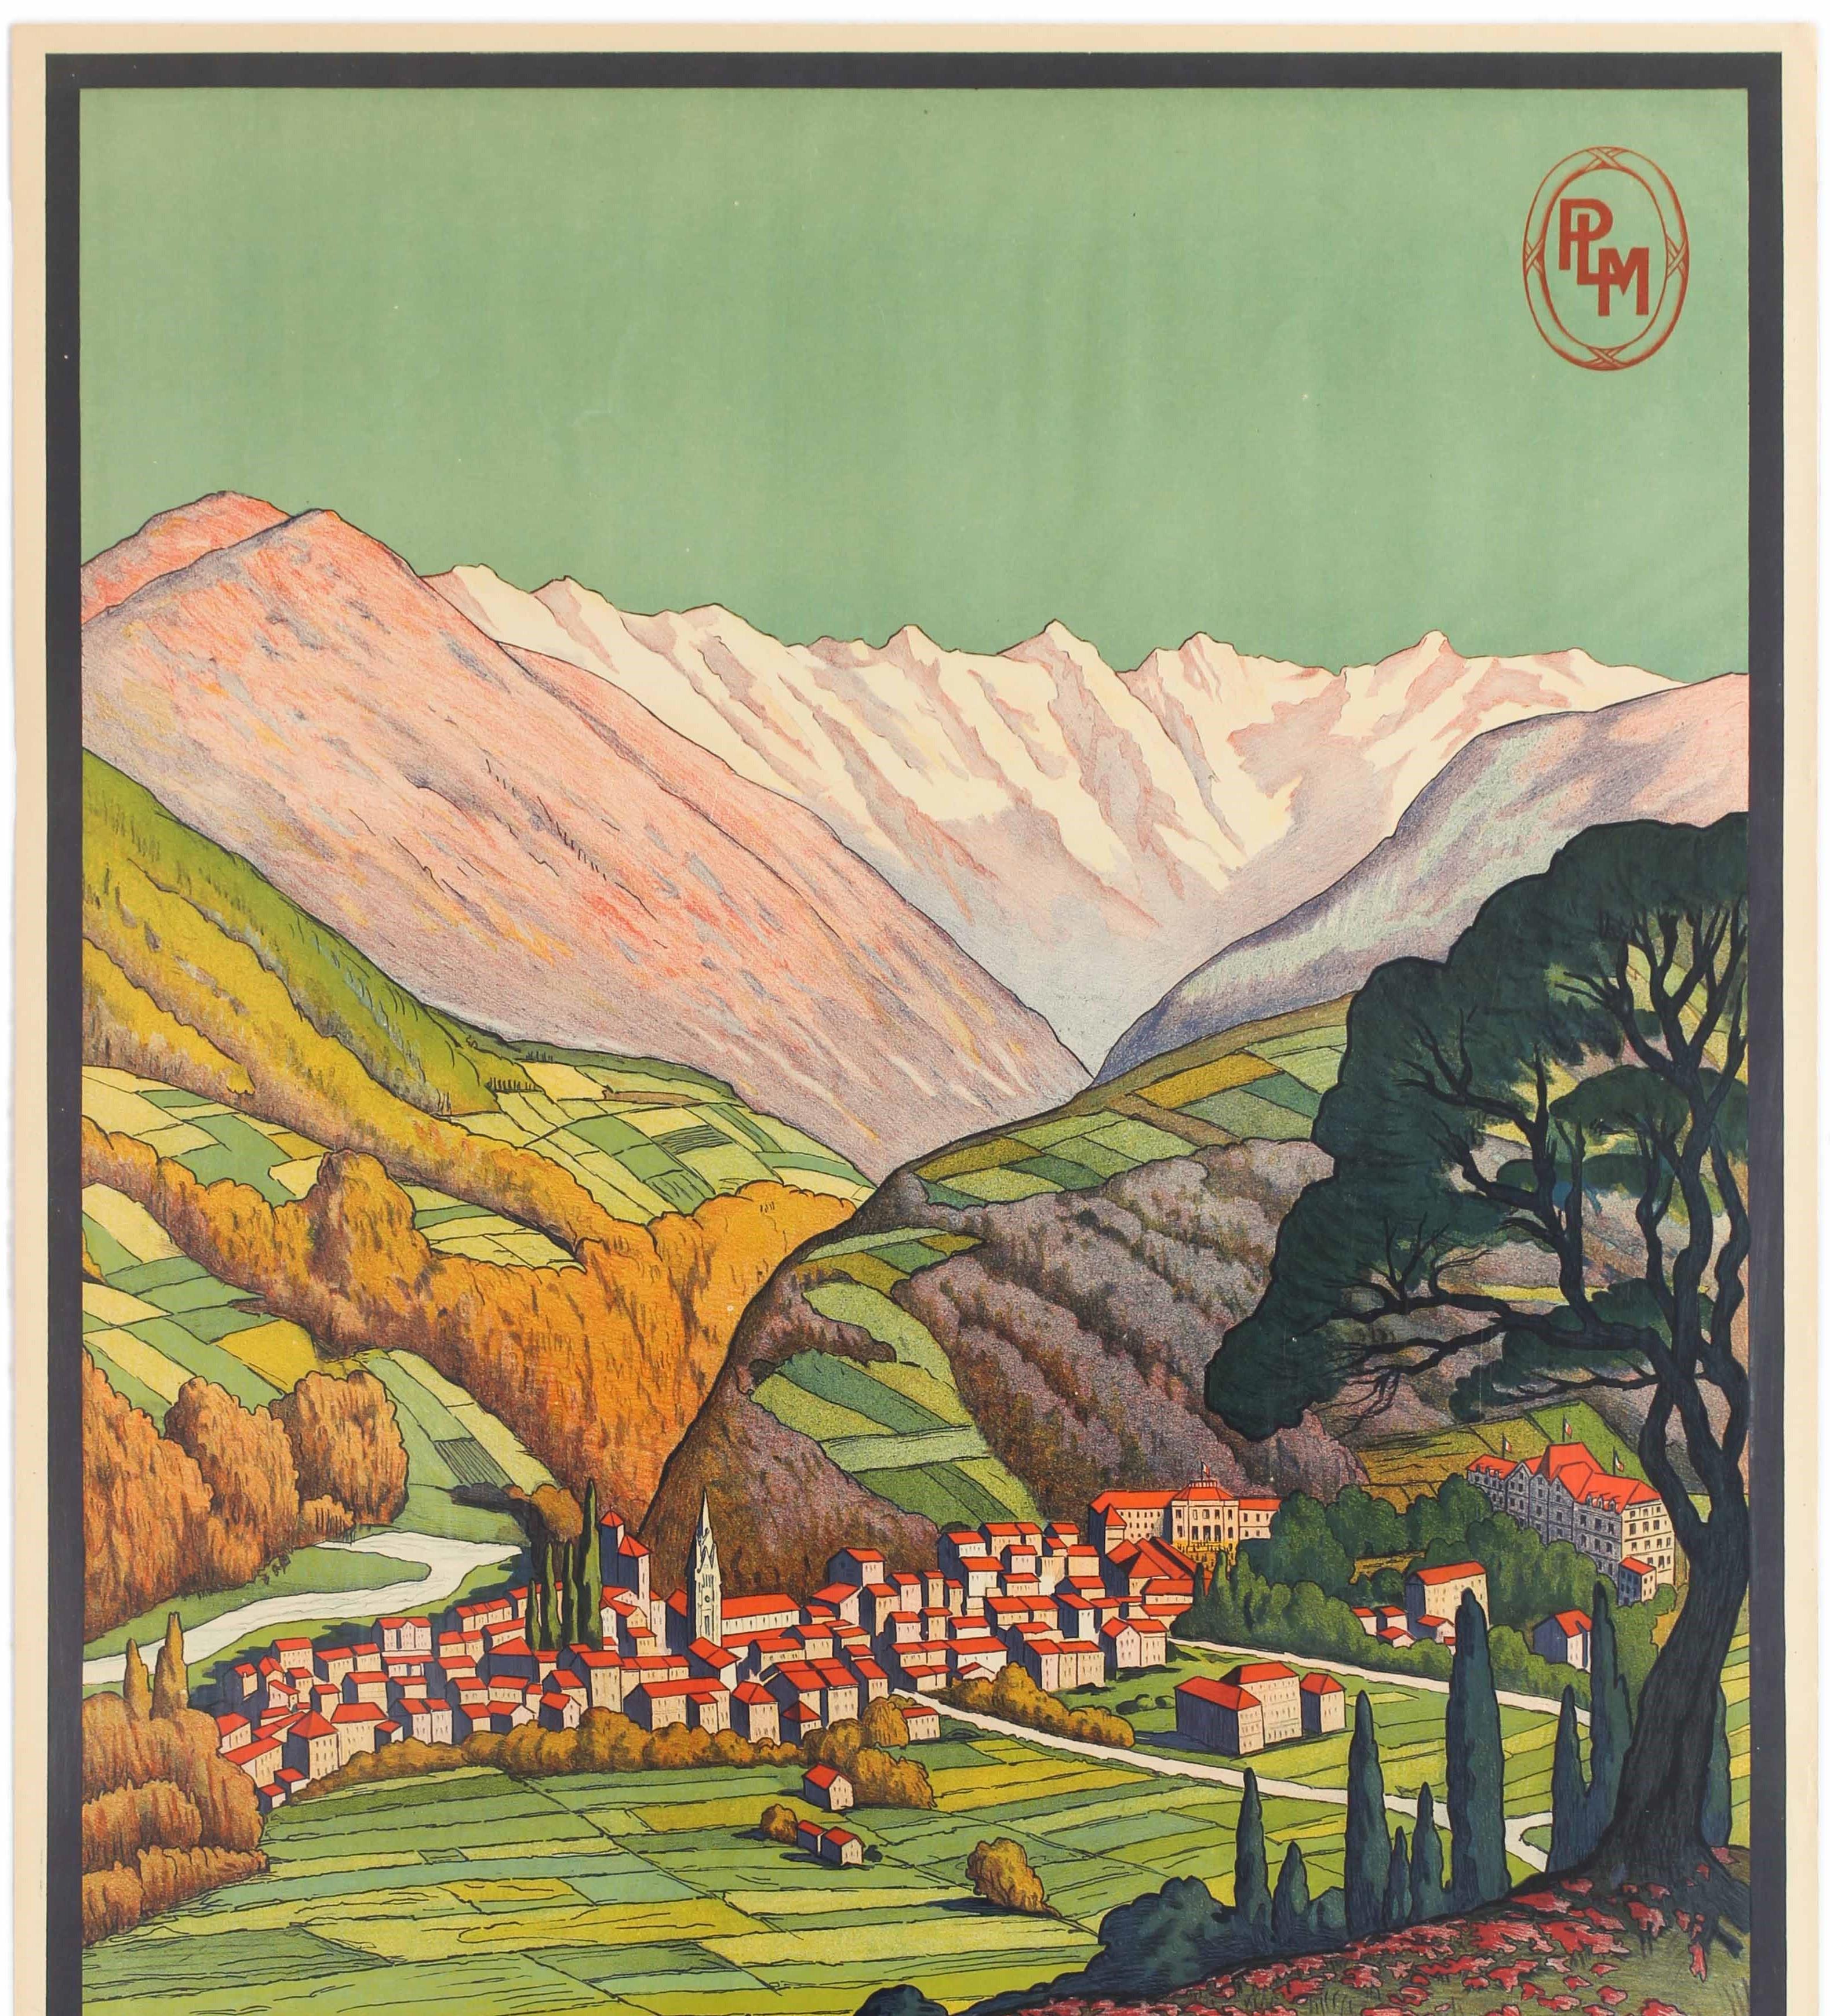 Original vintage travel poster for Allevard Les Bains Station Thermale Centre D'Excursions / Thermal Spa Excursions Centre issued by the PLM Paris Lyon Mediterranee railway featuring colorful artwork by Jean Julien (b 1888) depicting the town